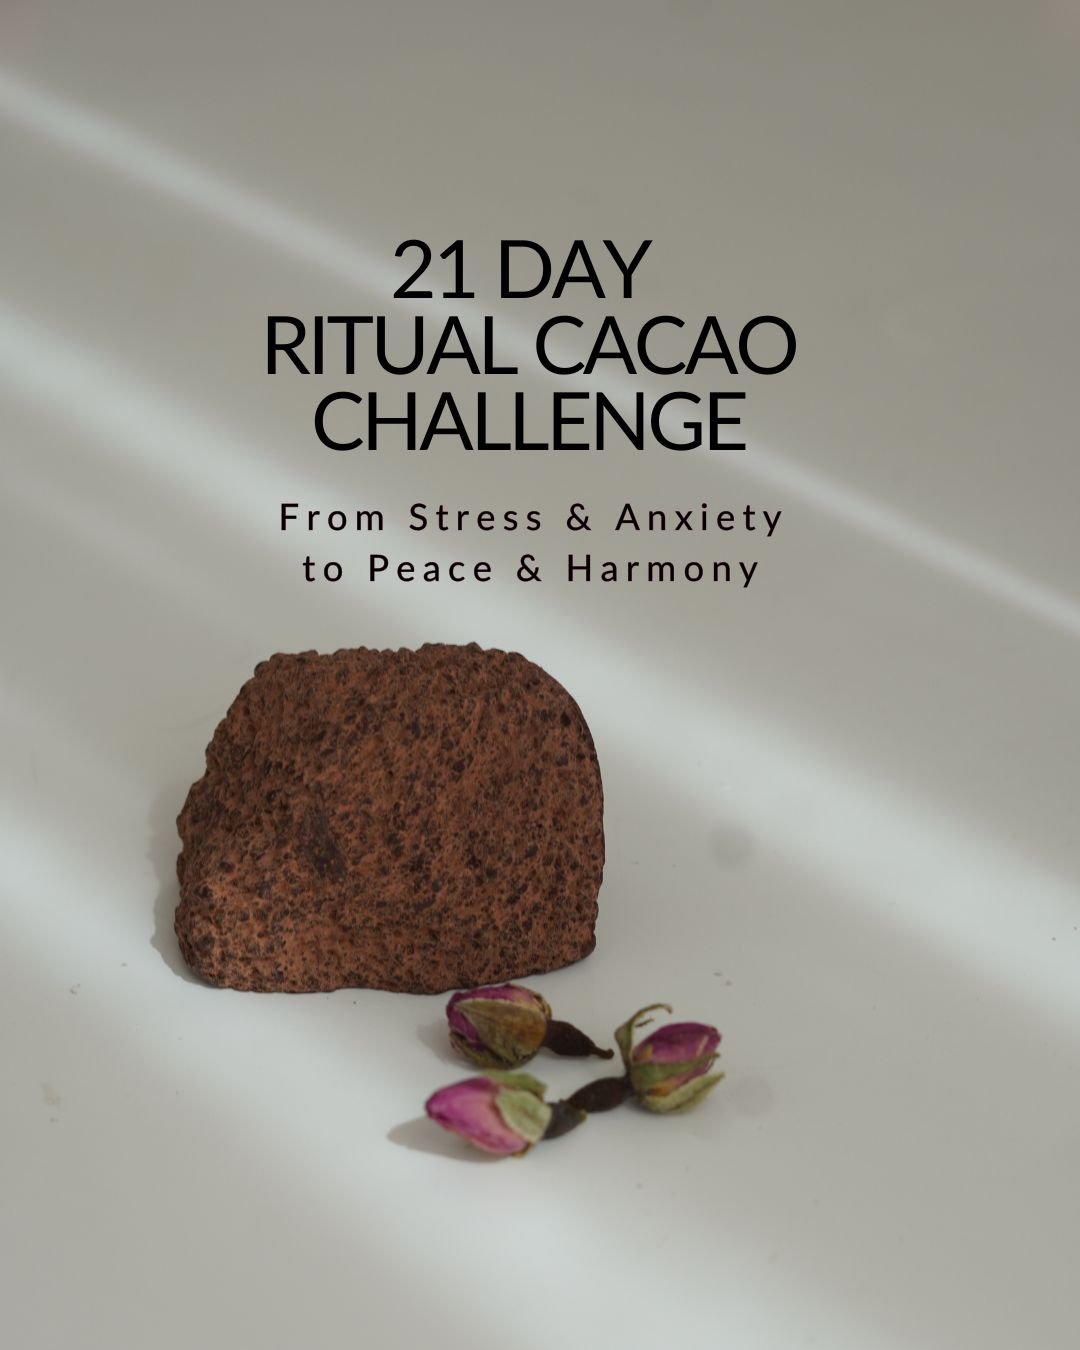 ✨🧘&zwj;♂️Today kicks off Mental Health Awareness week, and every year since 2020 we have run our 21 Day Ritual Cacao Challenge, to show how ceremonial-grade cacao is the perfect wellbeing remedy for mental, emotional and physical health.🌱

This yea